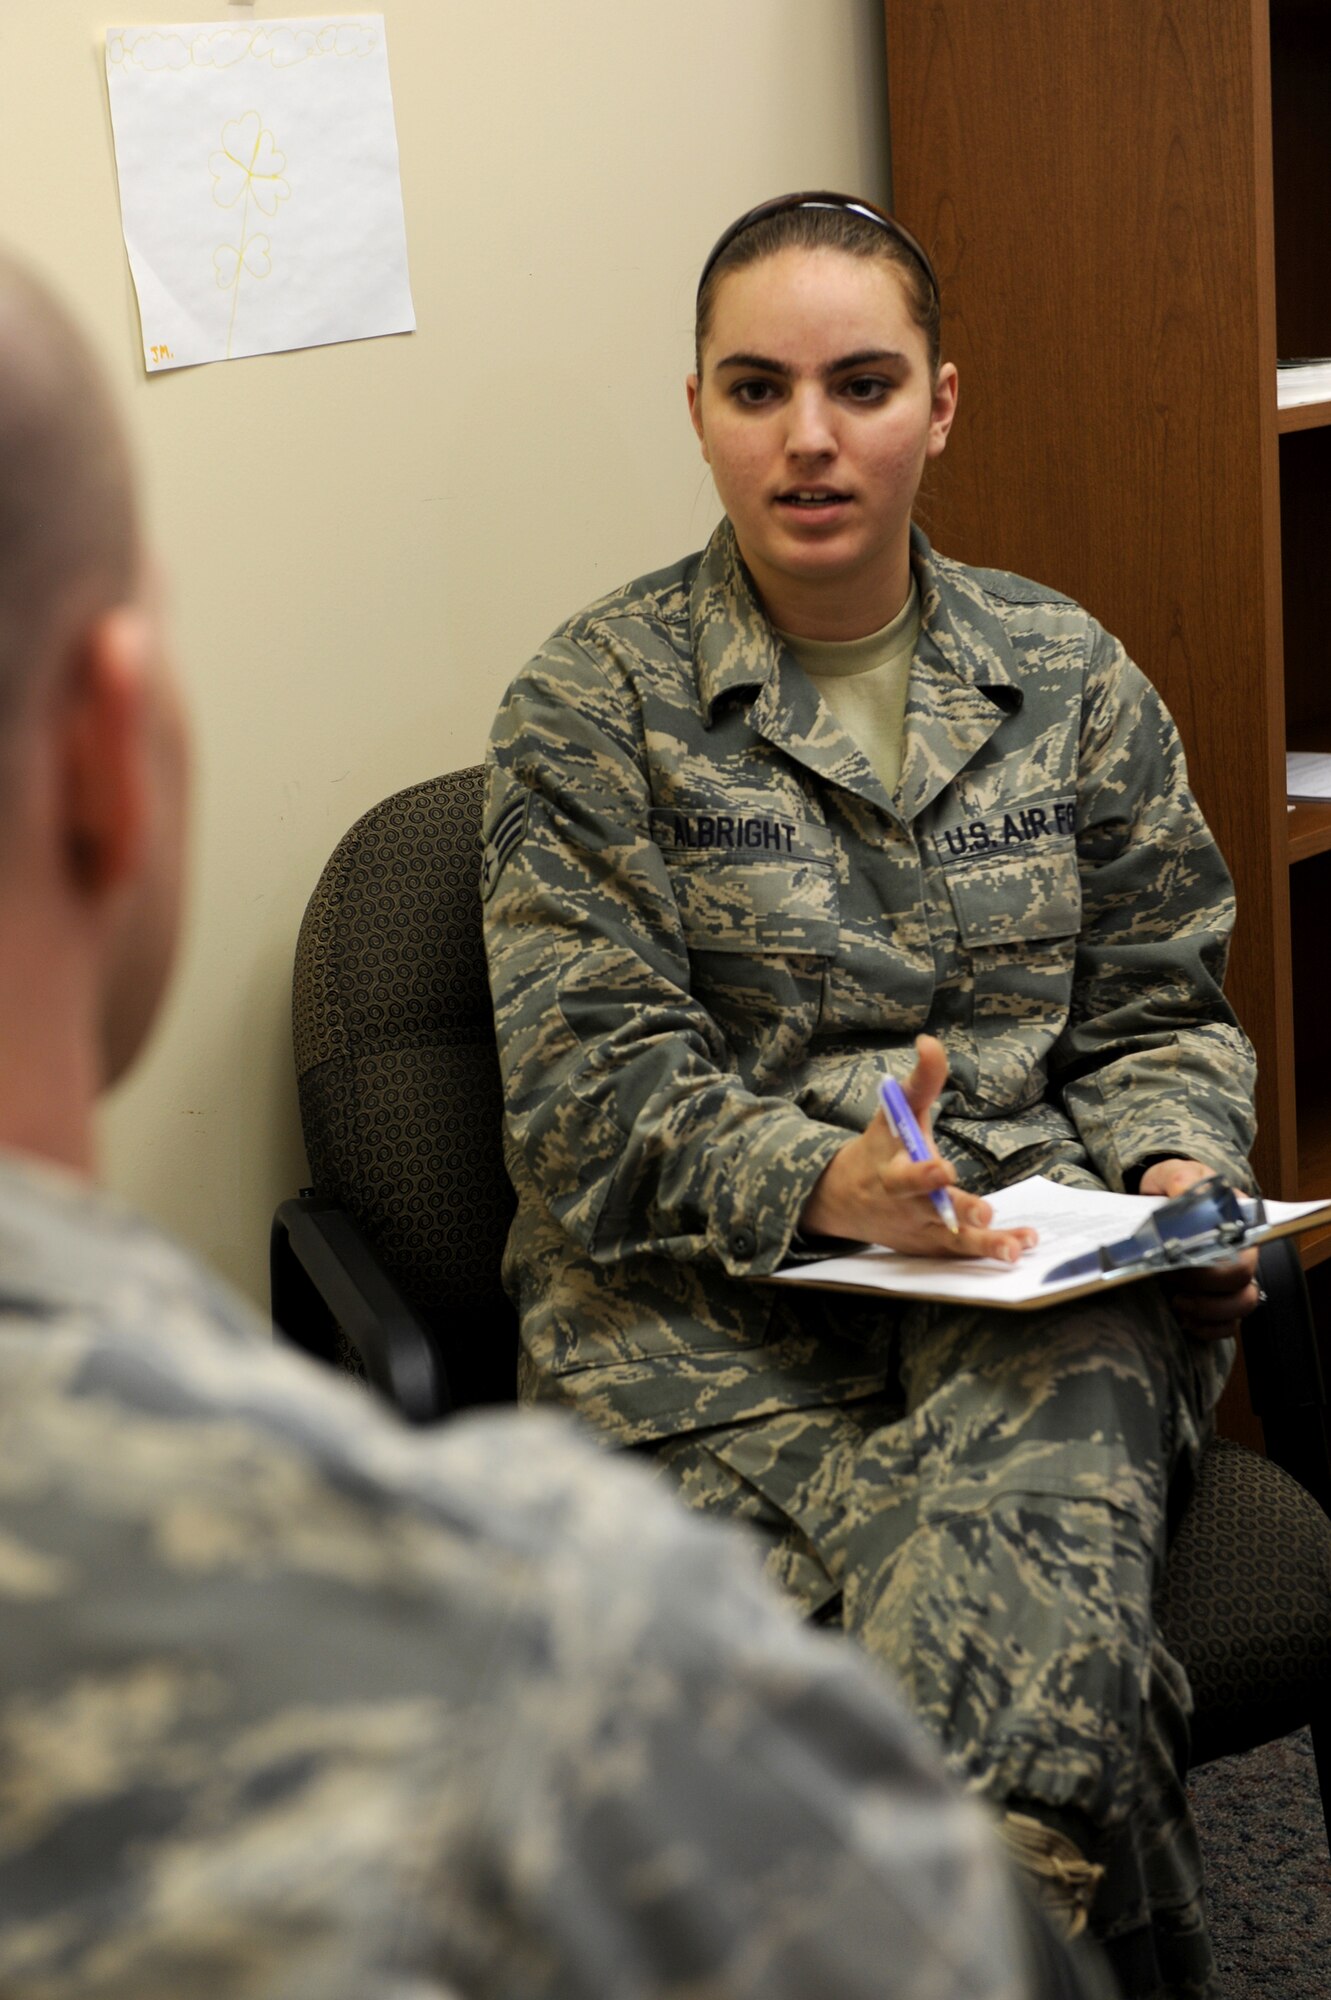 MINOT AIR FORCE BASE, N.D. -- Senior Airman Ashley Albright, 5th Medical Operations Squadron mental health technician, asks routine questions to a patient here Nov 3. Airman Albright was recognized as an outstanding performer during the 5th Medical Group’s recent Air Force Inspection Agency Health Services Inspection. The medical group was rated outstanding in eight of the 16 topical graded areas and captured an overall excellent rating for the HSI. (U.S. Air Force photo by Tech. Sgt. Lee A. Osberry Jr.)